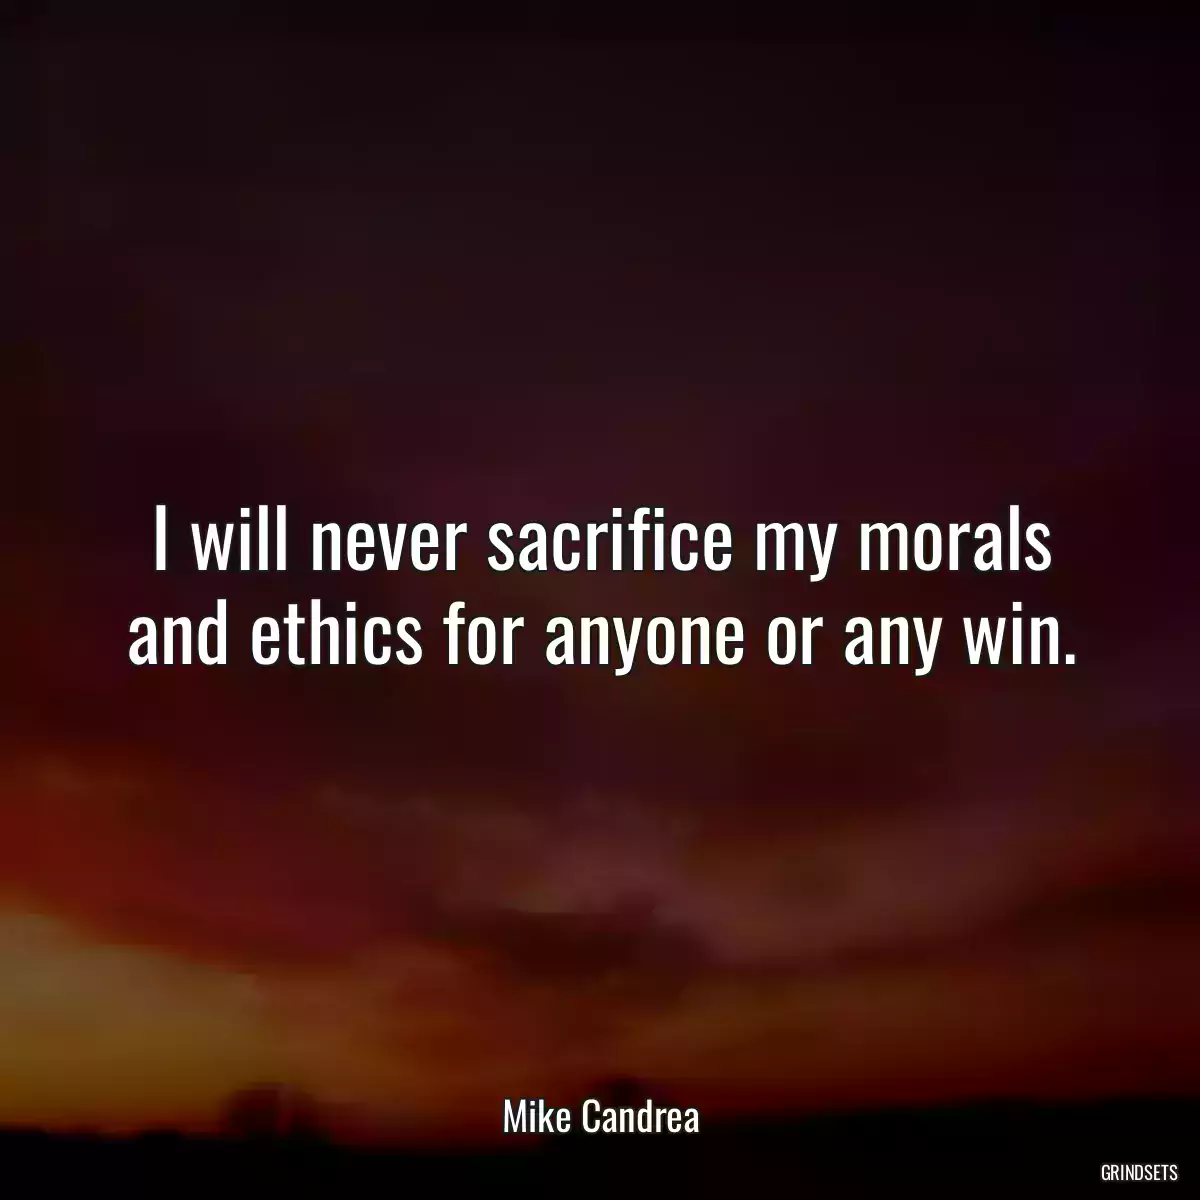 I will never sacrifice my morals and ethics for anyone or any win.